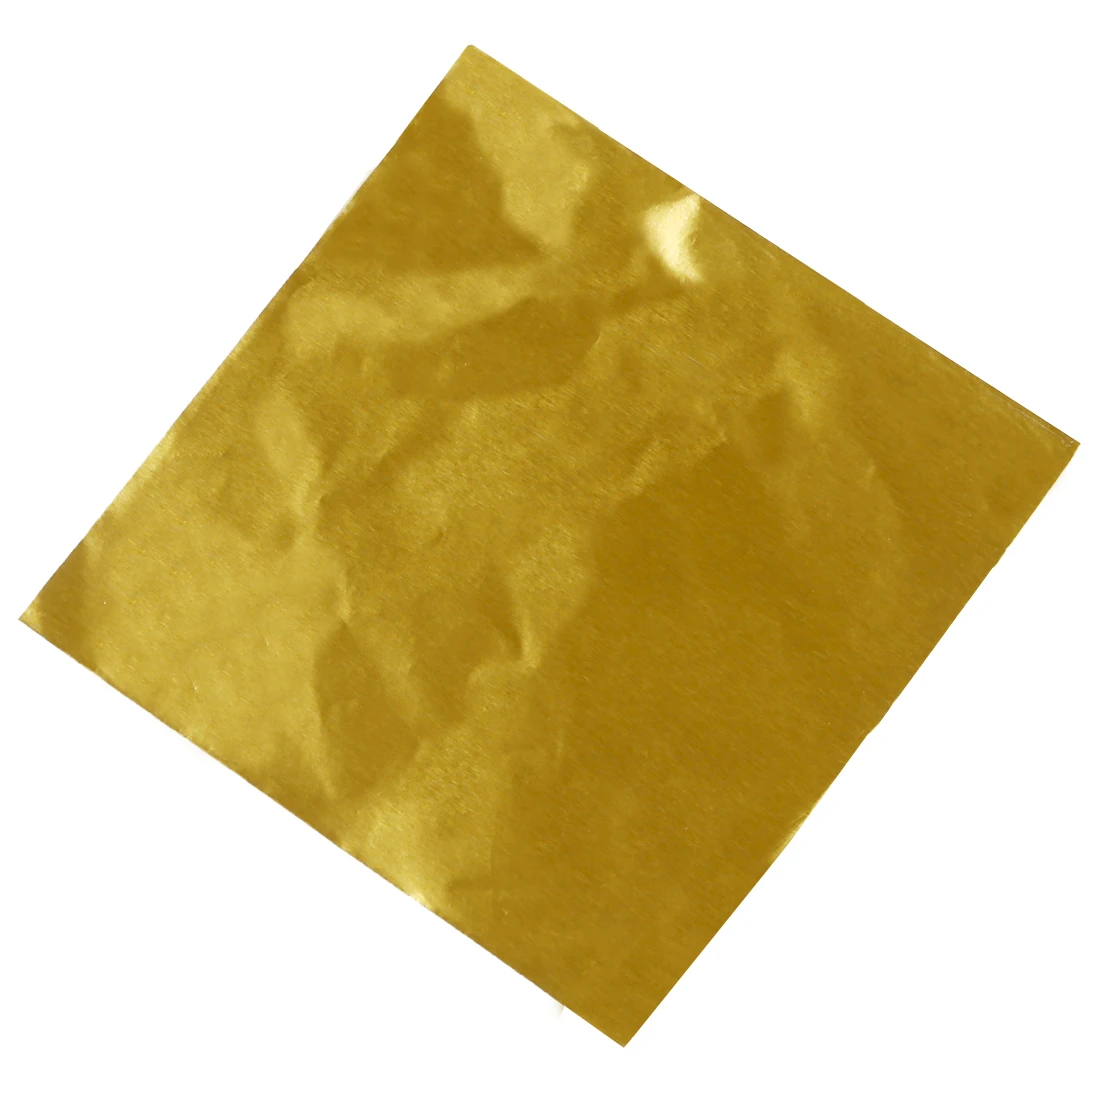 

Cute 100pcs Sweets Candy Package Foil Paper Chocolate Lolly Foil Wrappers Square (Gold)